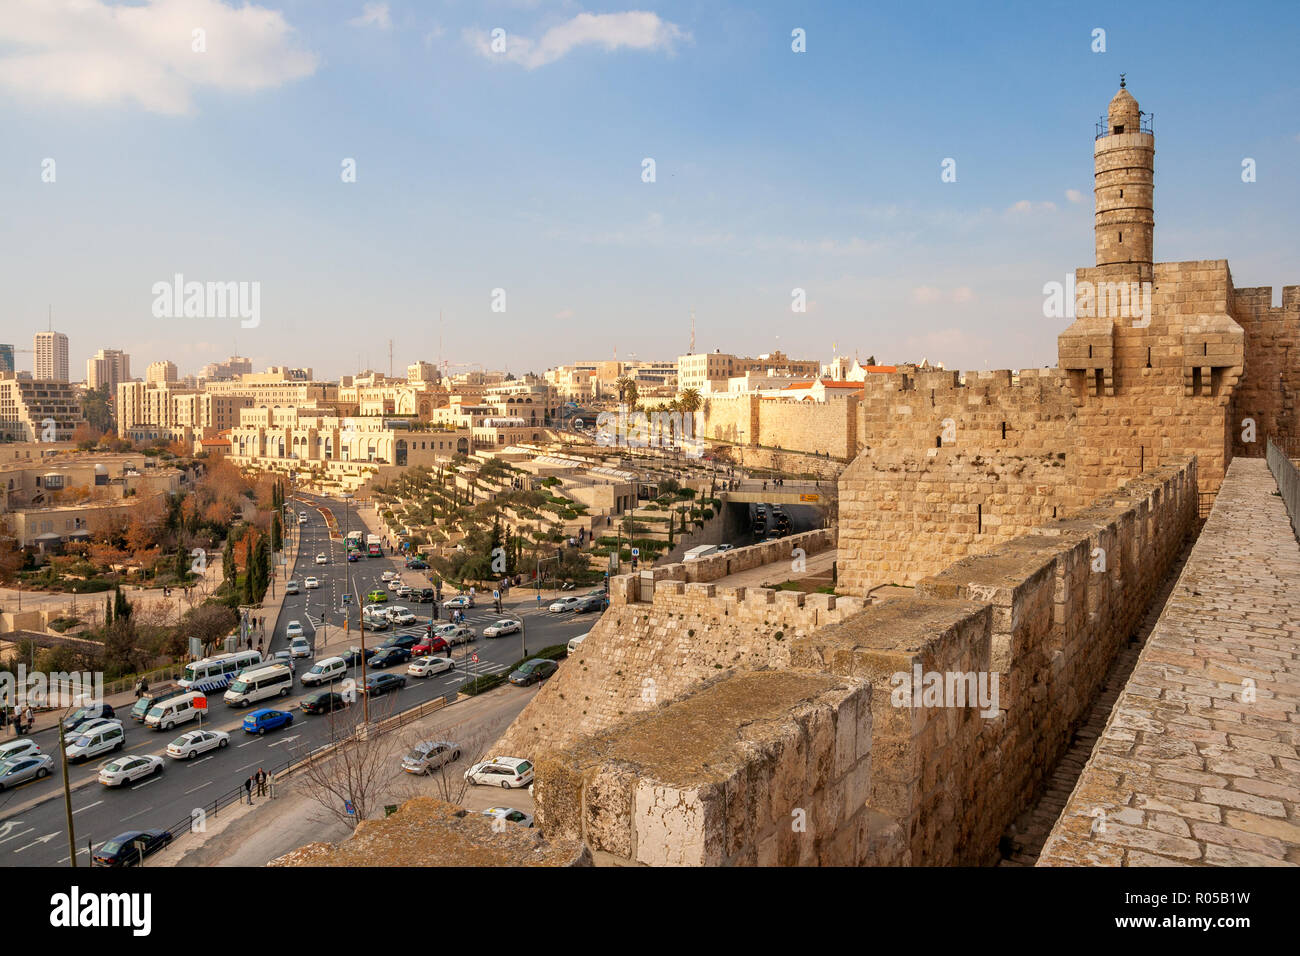 JERUSALEM - JAN 24, 2011: View from the old city wall of Jerusalem on the Tower of David and traffic around the city centre. Stock Photo